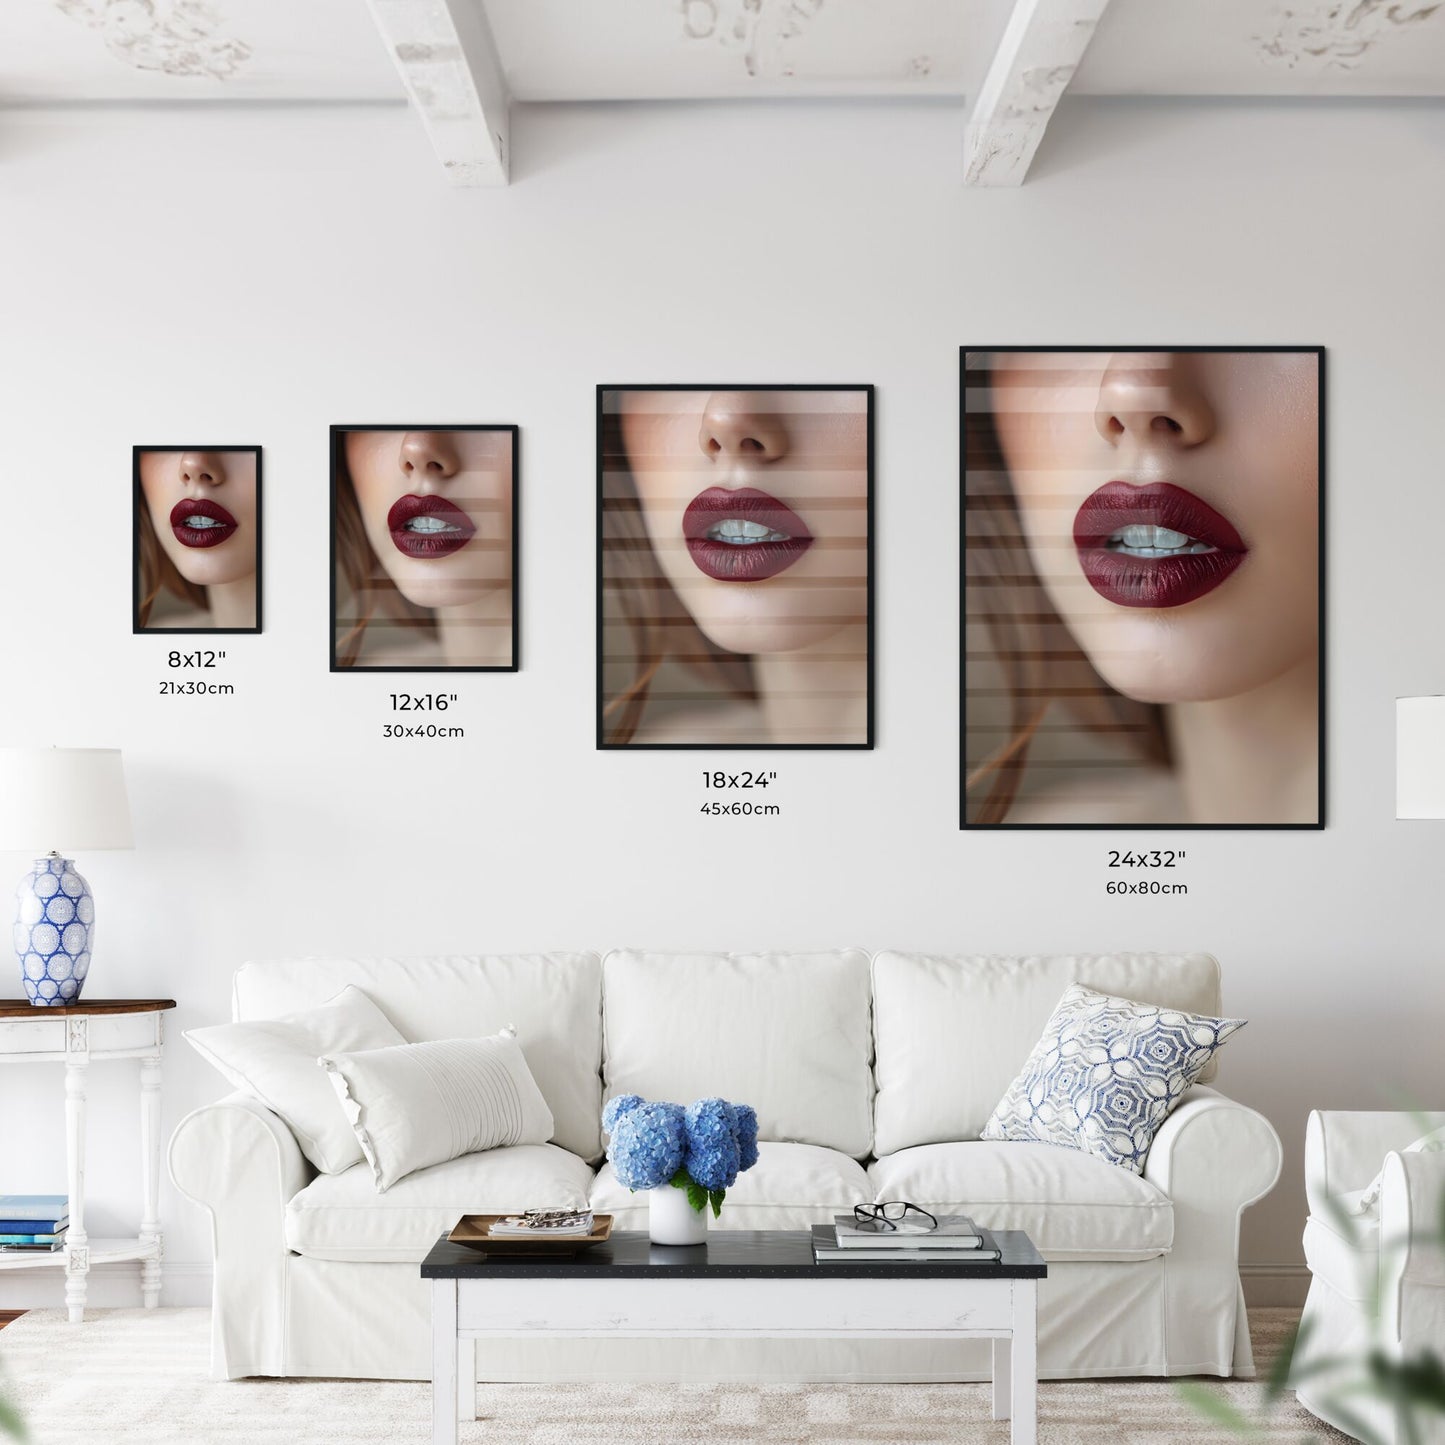 Vibrant Artwork: Lips with Permanent Makeup in Beauty Studio Showcase Stunning Beauty in Unique Composition and Lighting Default Title